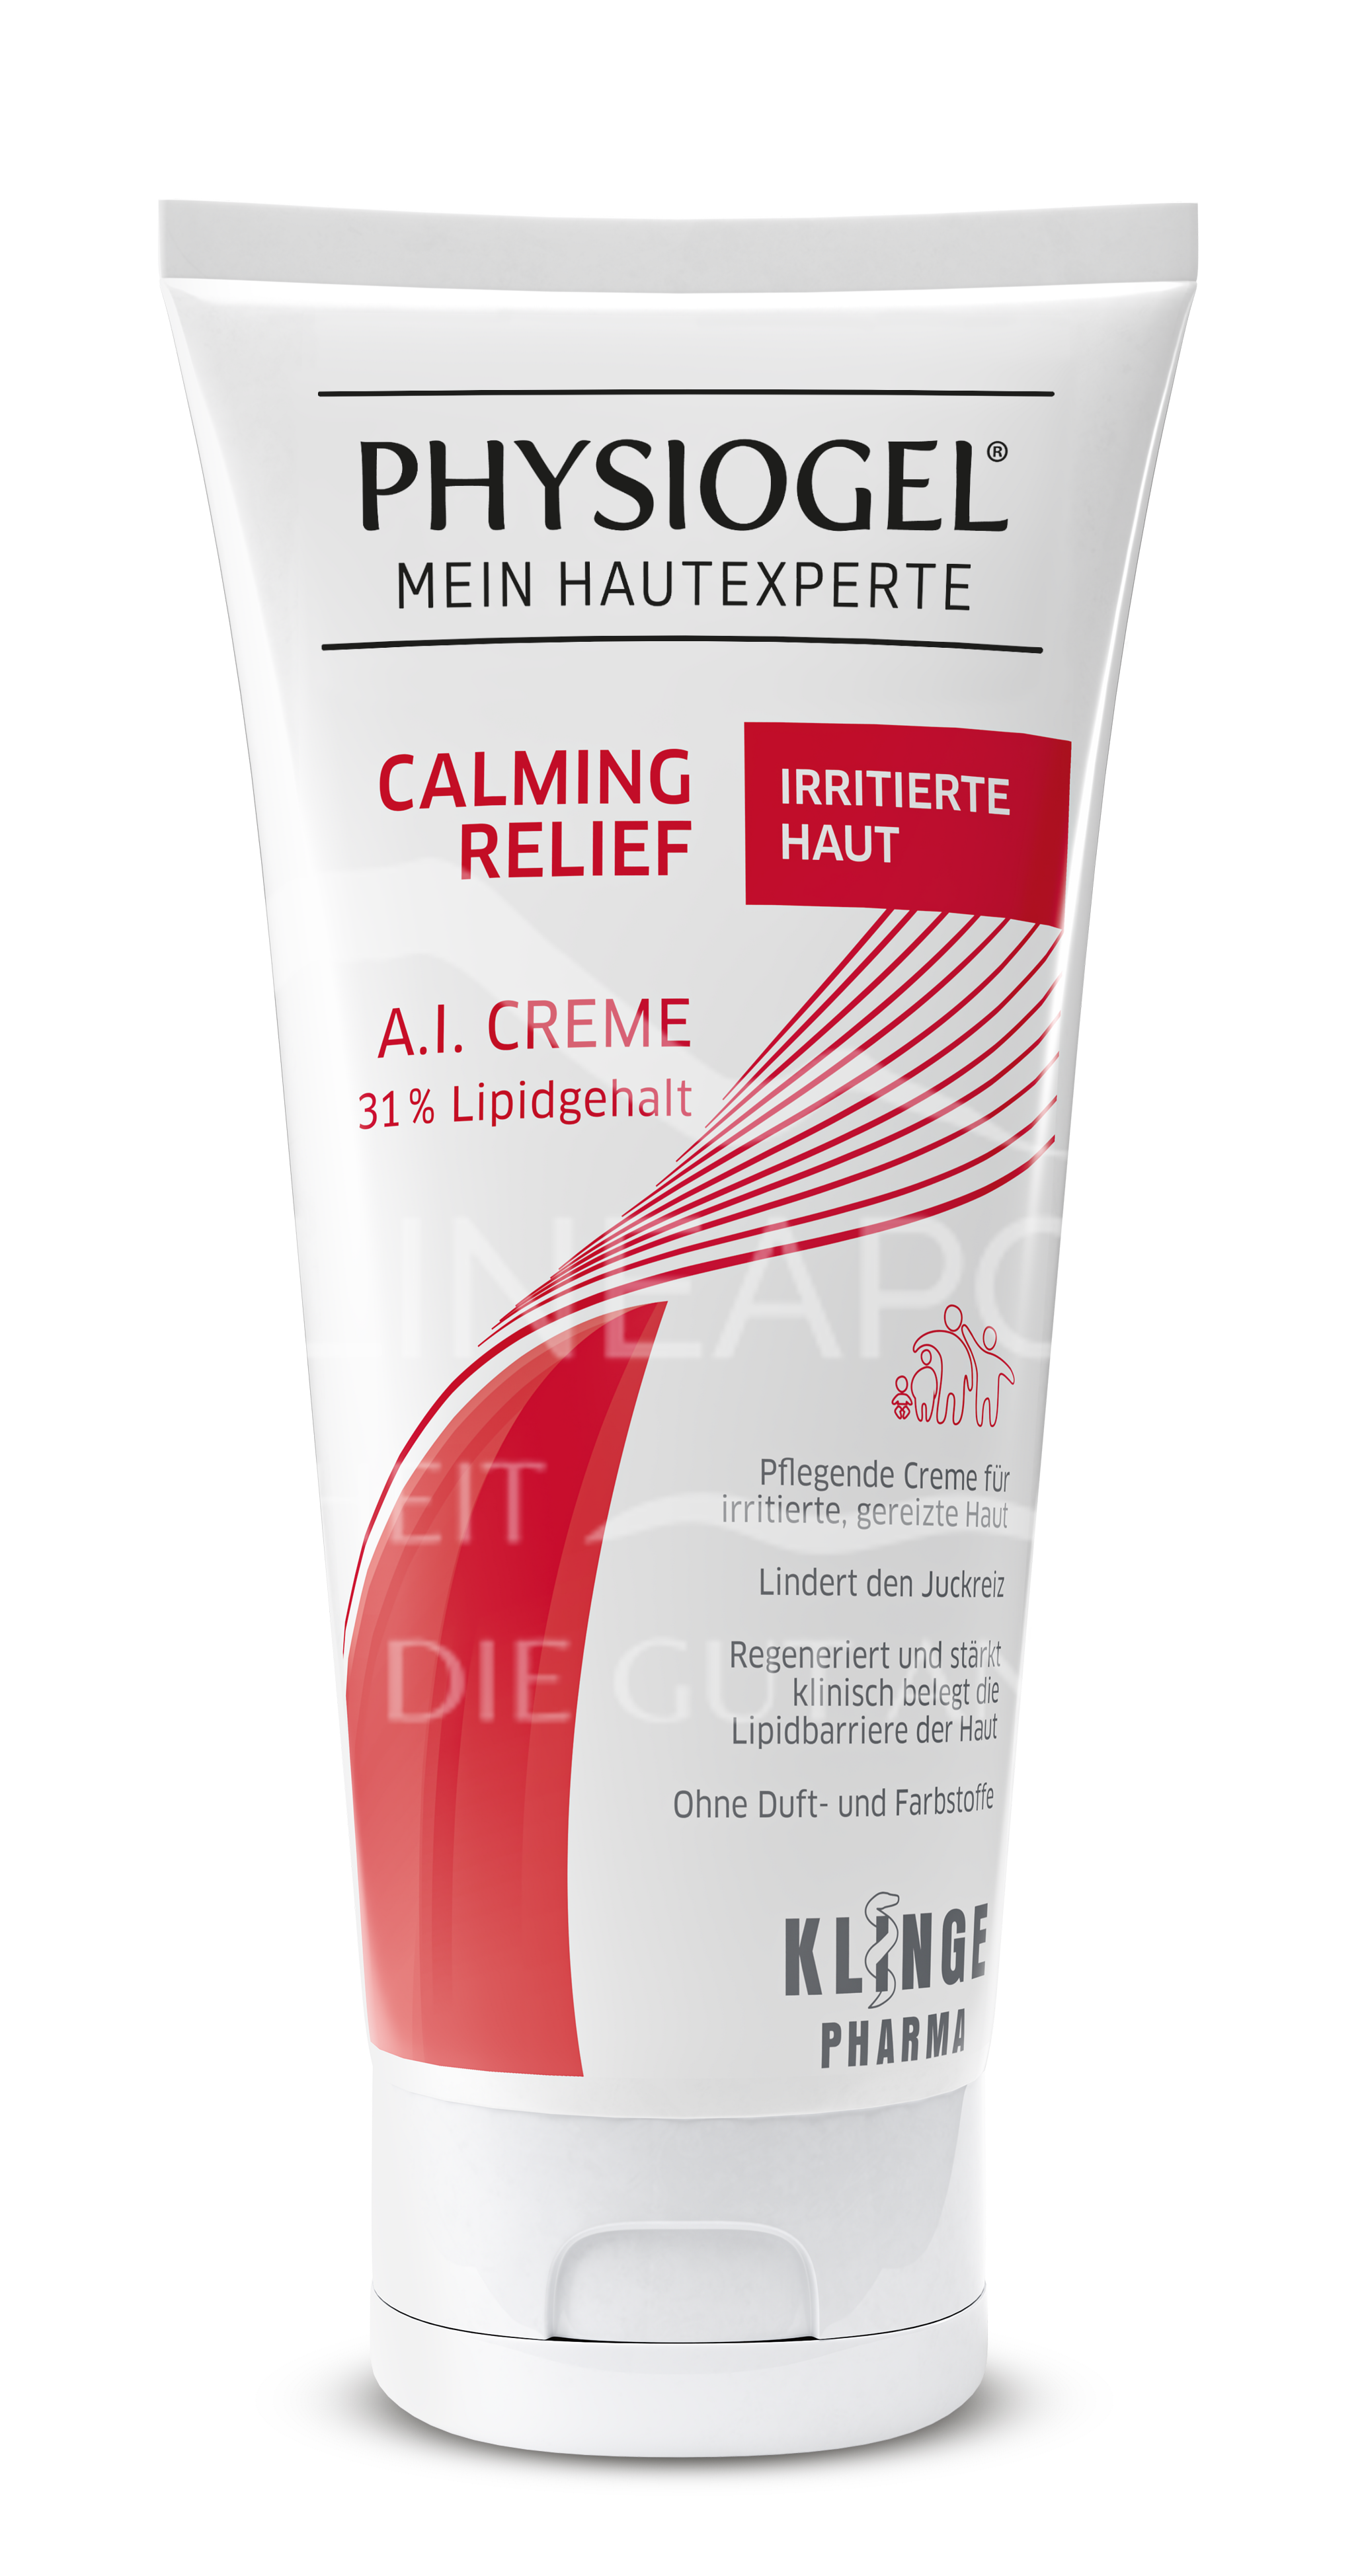 Physiogel® Calming Relief A.I. Creme - Irritierte Haut